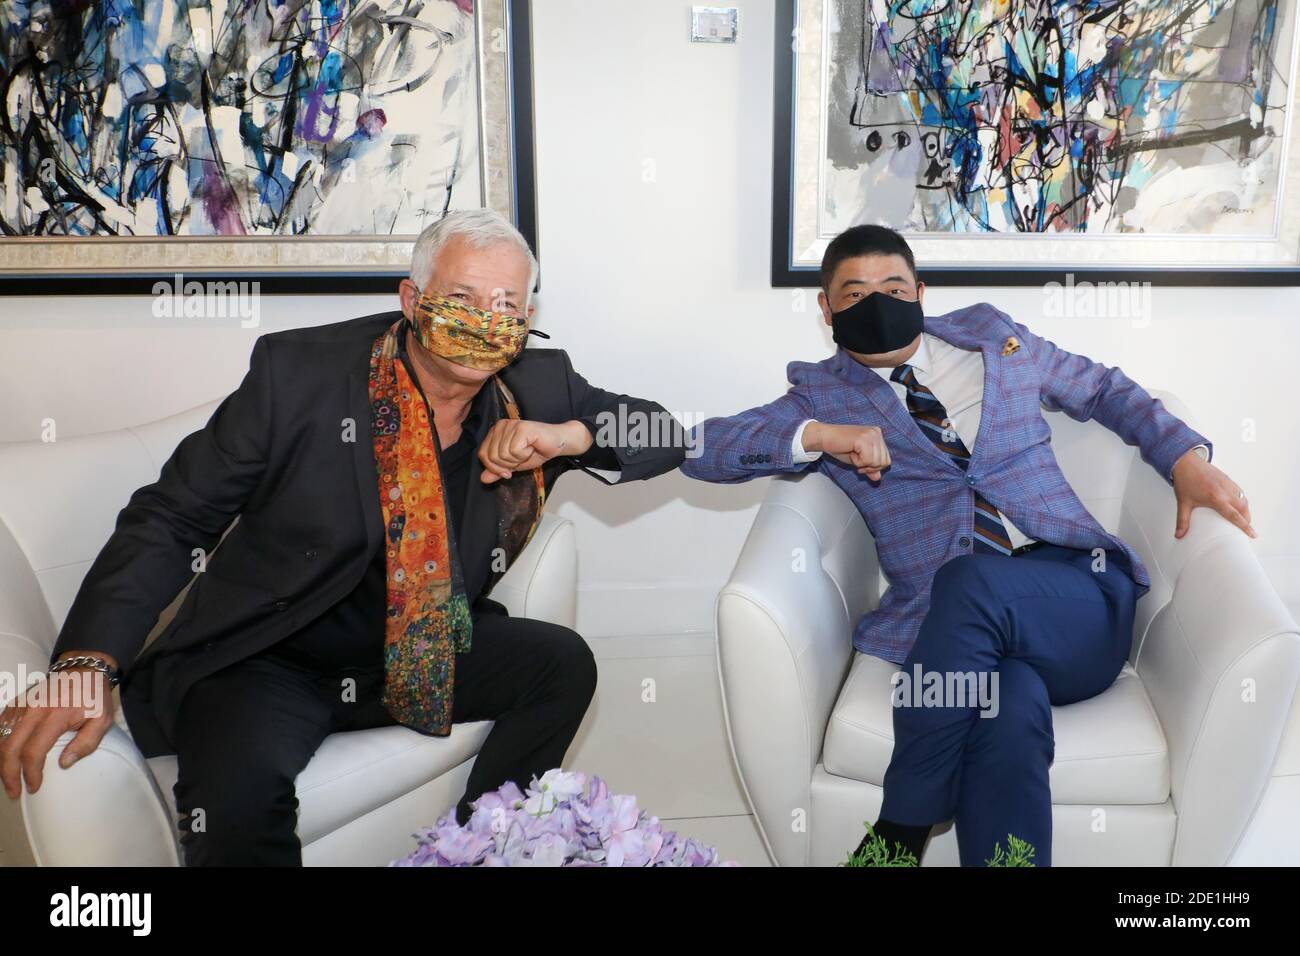 Beverly Hills, California.  27th November, 2020.  Art consultant /curator Michael Sean Degnan and TV Host Joey Zhou tap elbows wearing their masks during their interview for the Zhou Zheng Art Channel show at the Winn Slavin Fine Art Gallery in Beverly Hills.  Degnan is the Senior Art Advisor and Media Marketing Director for the Winn Slavin Fine Art Gallery,  Ambassador at Mondial Art Academia, and art consultant/curator in the art industry.  Joey Zhou is the host of the Zhou Zheng Art Channel and founder of the Los Angeles Beverly Arts (LABA) and The Beverly News. Credit:  Sheri Determan Stock Photo